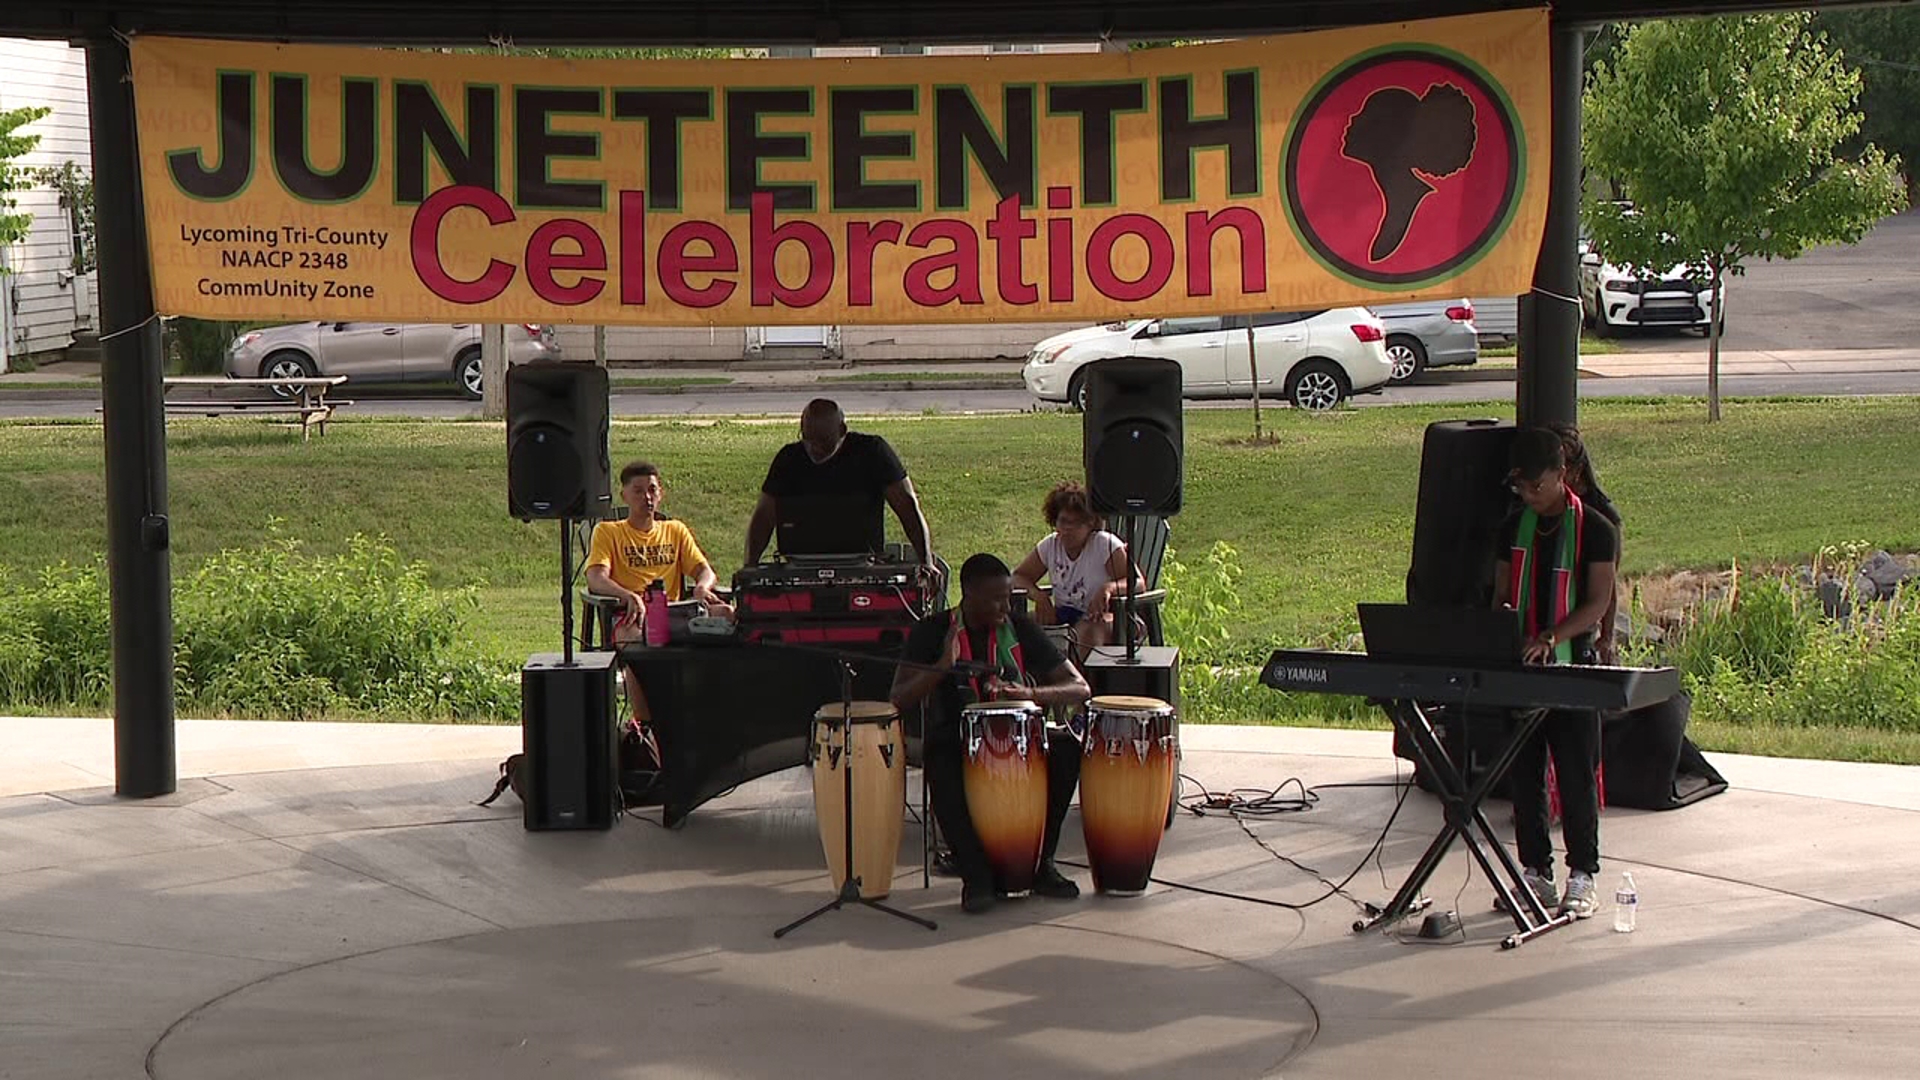 Music, art, and the meaning behind Juneteenth filled part of downtown Lewisburg as many came to celebrate what is recognized as the country's second Independence Day